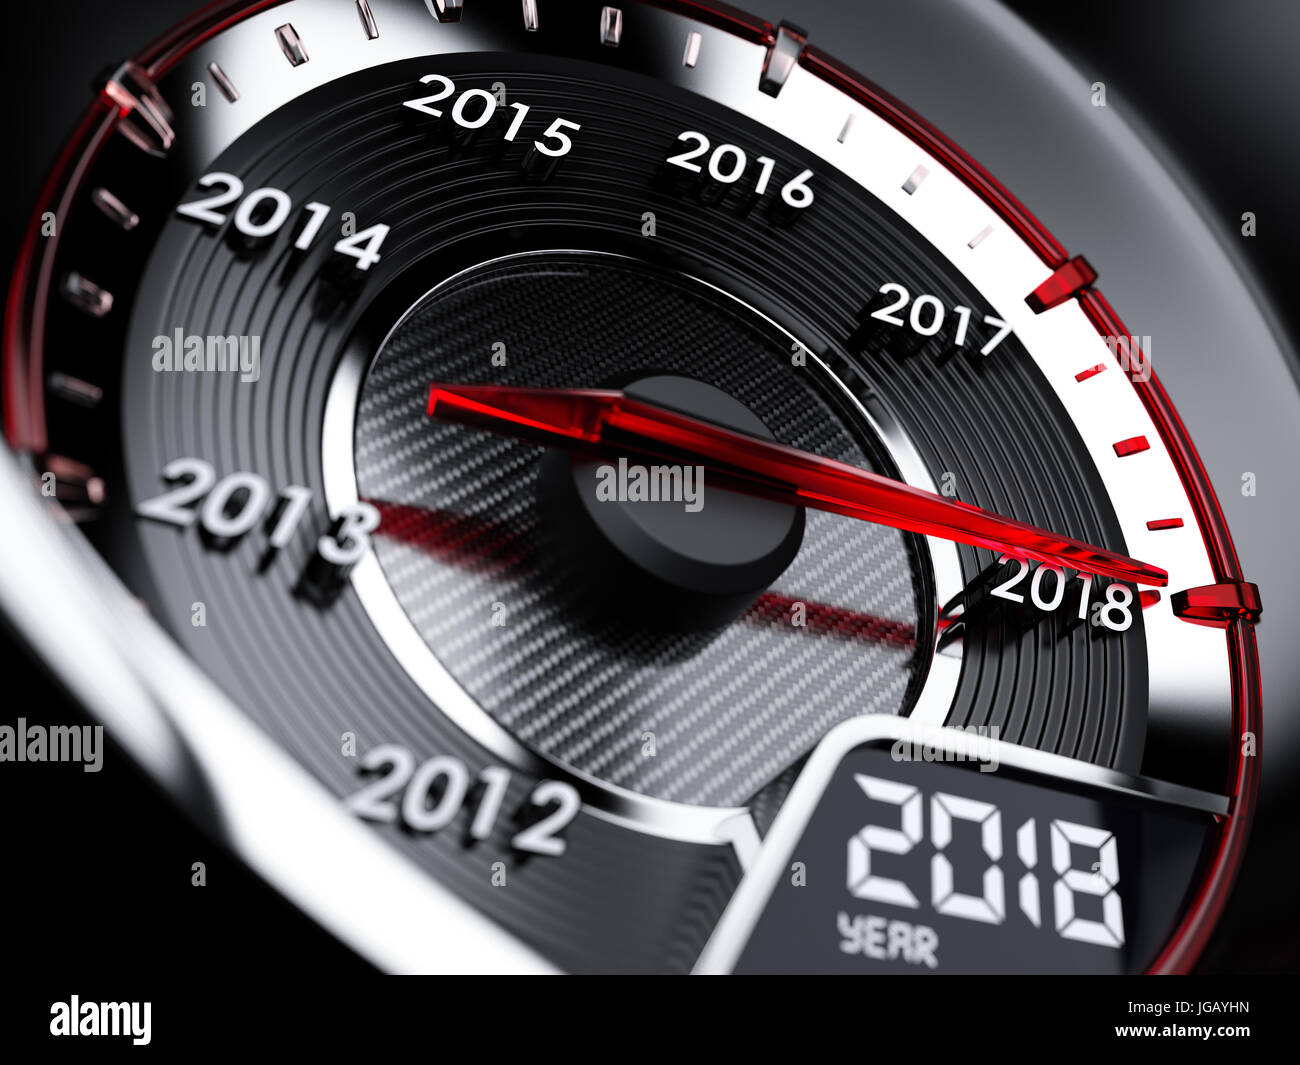 3d illustration of 2018 year car speedometer. Countdown concept Stock Photo